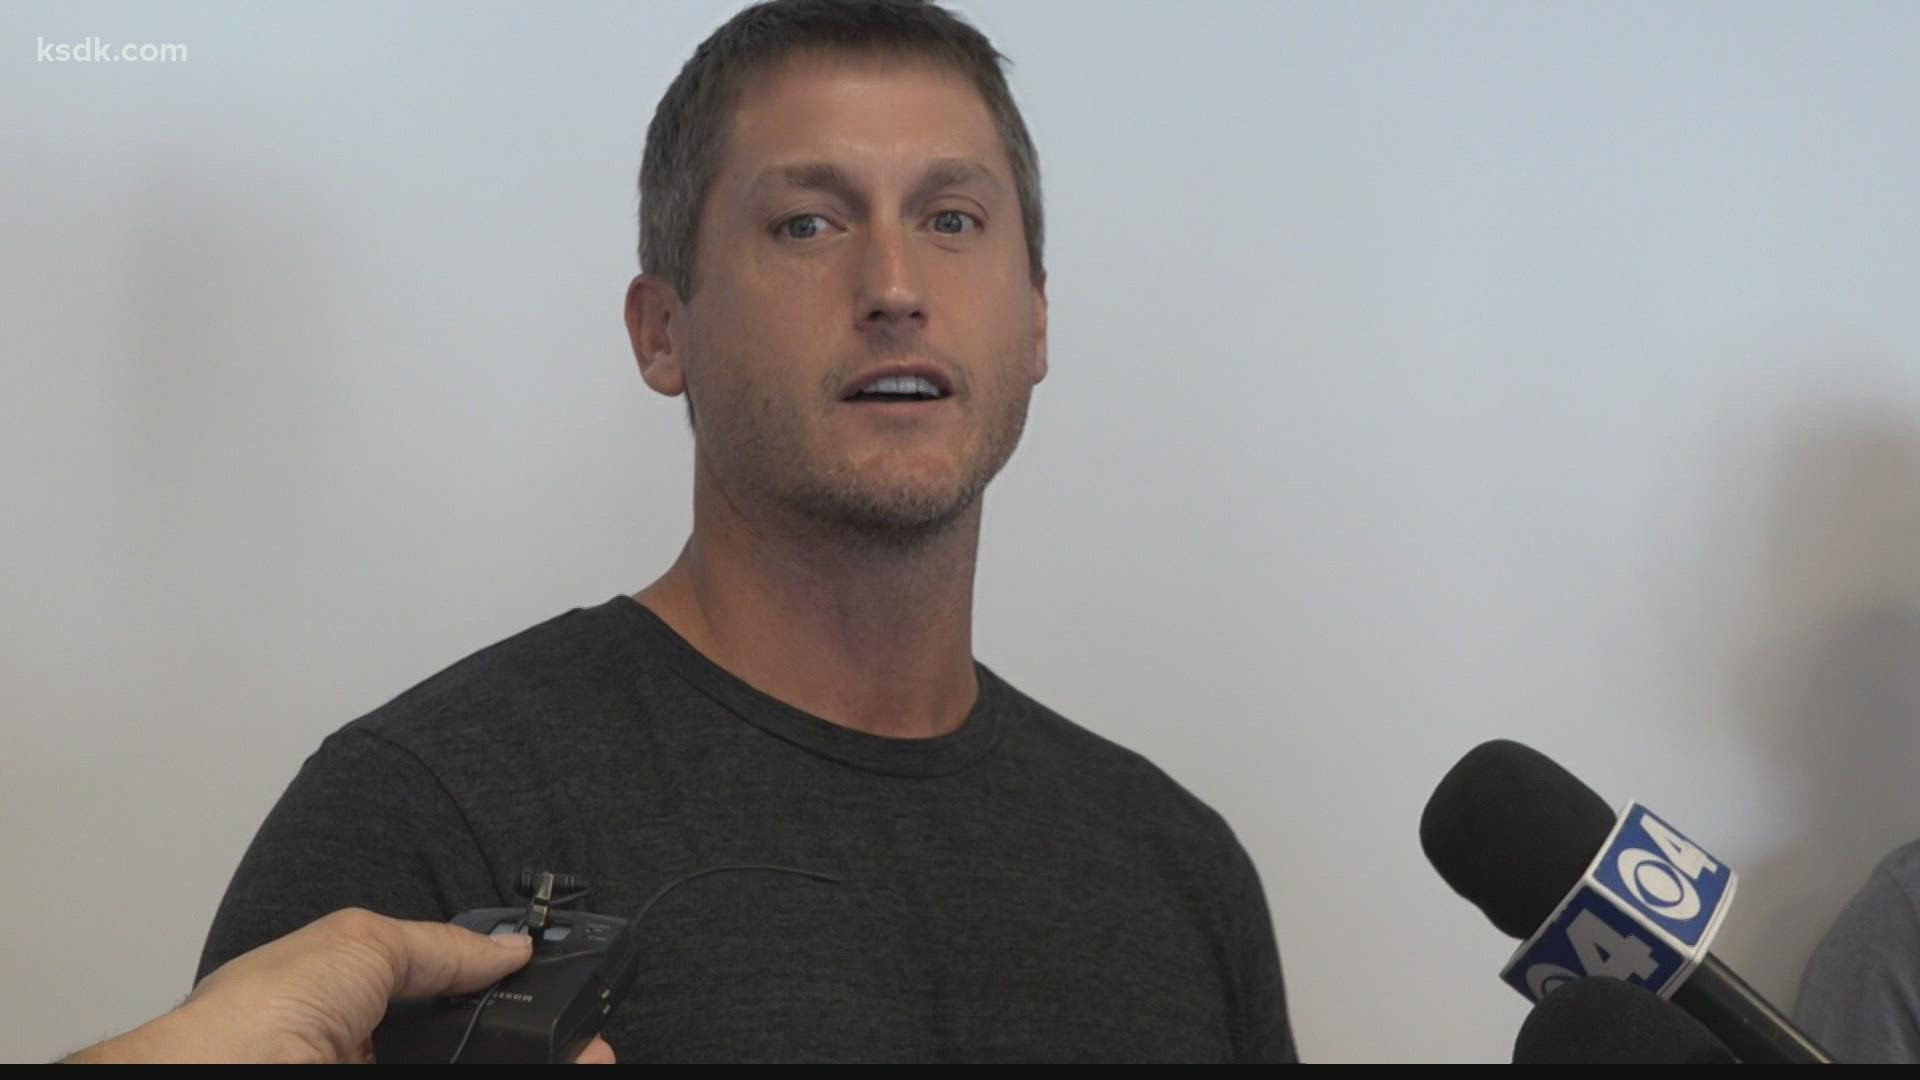 David Freese declines induction into the St. Louis Cardinals' Hall of Fame  – KGET 17